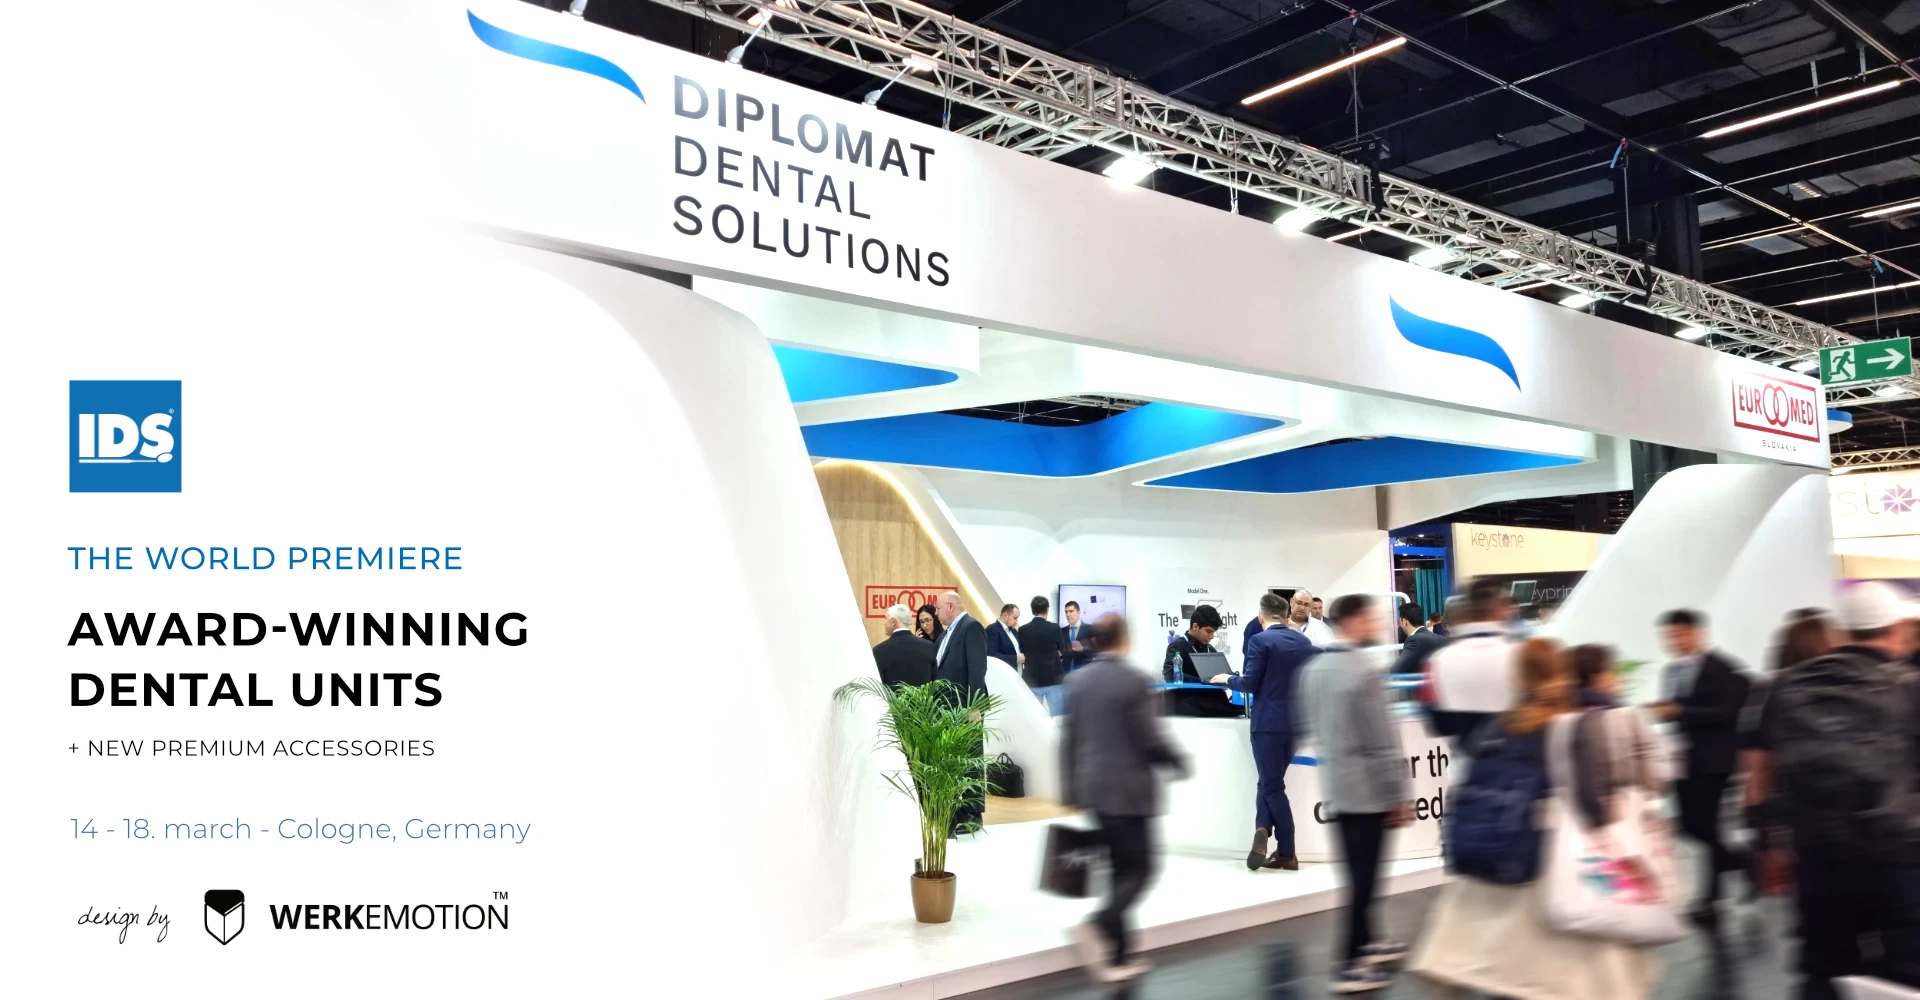 WERKEMOTION at IDS Expo 2023 with Diplomat Dental (Cologne, Germany)